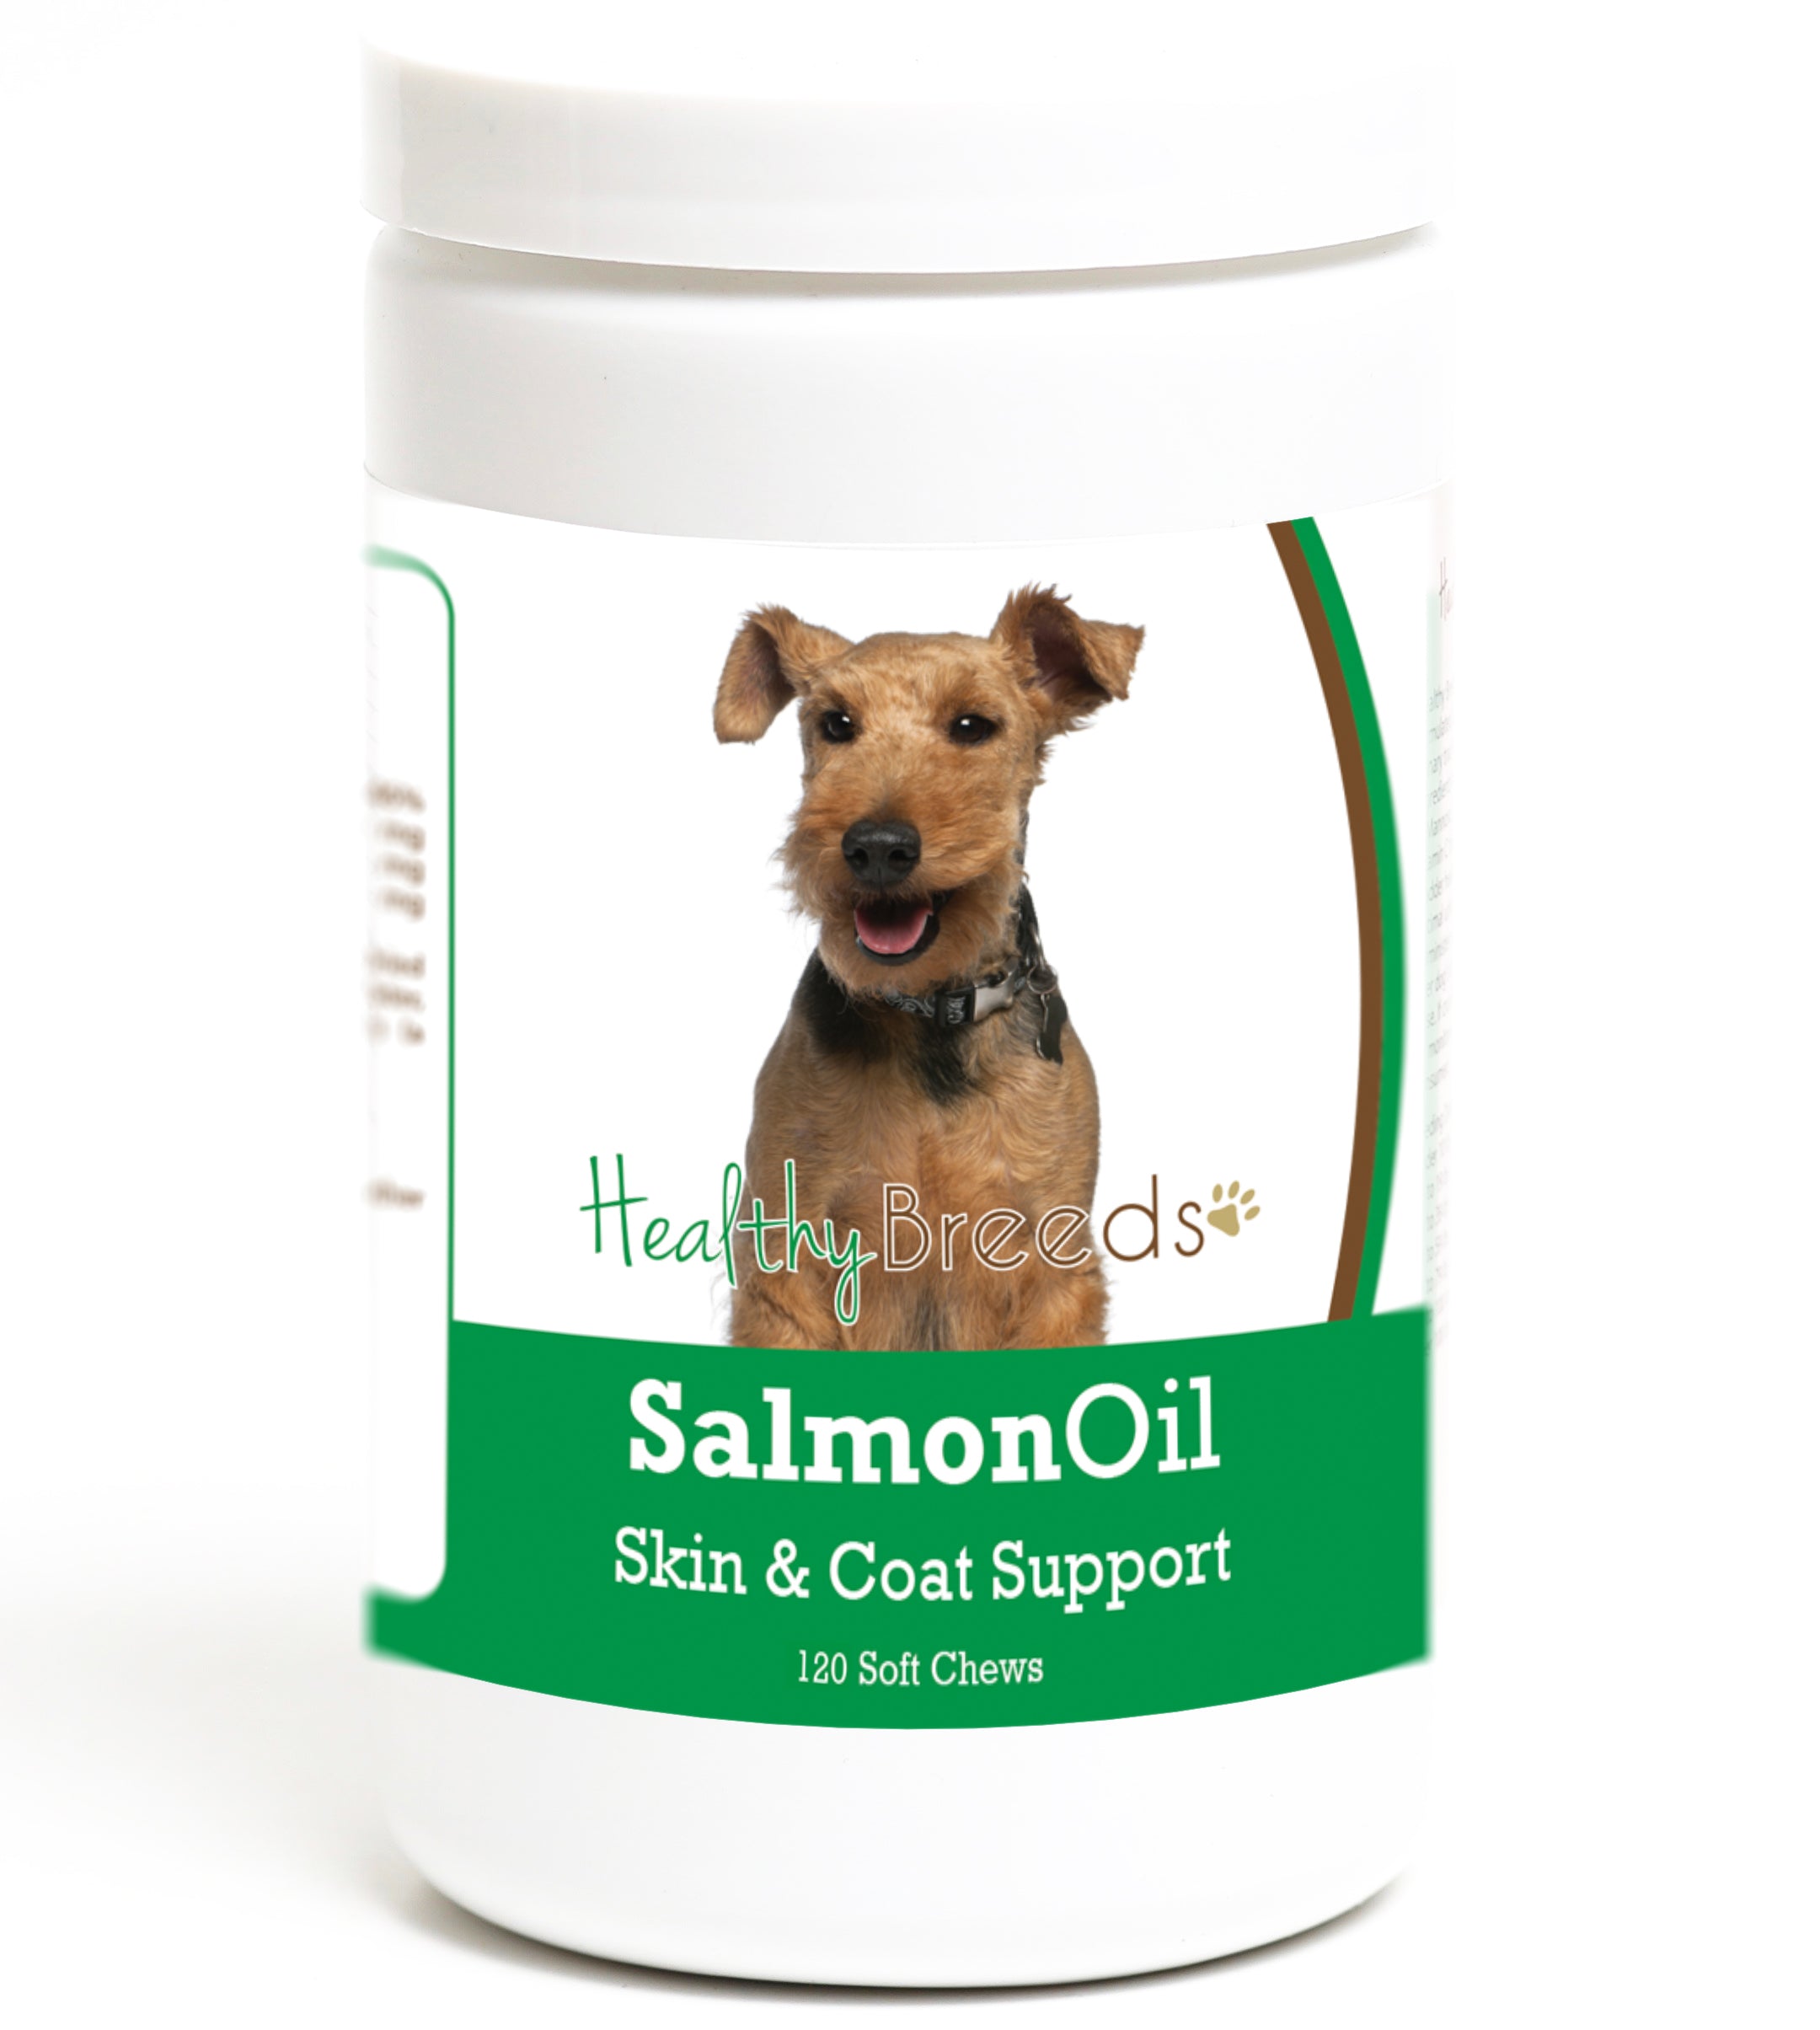 Welsh Terrier Salmon Oil Soft Chews 120 Count